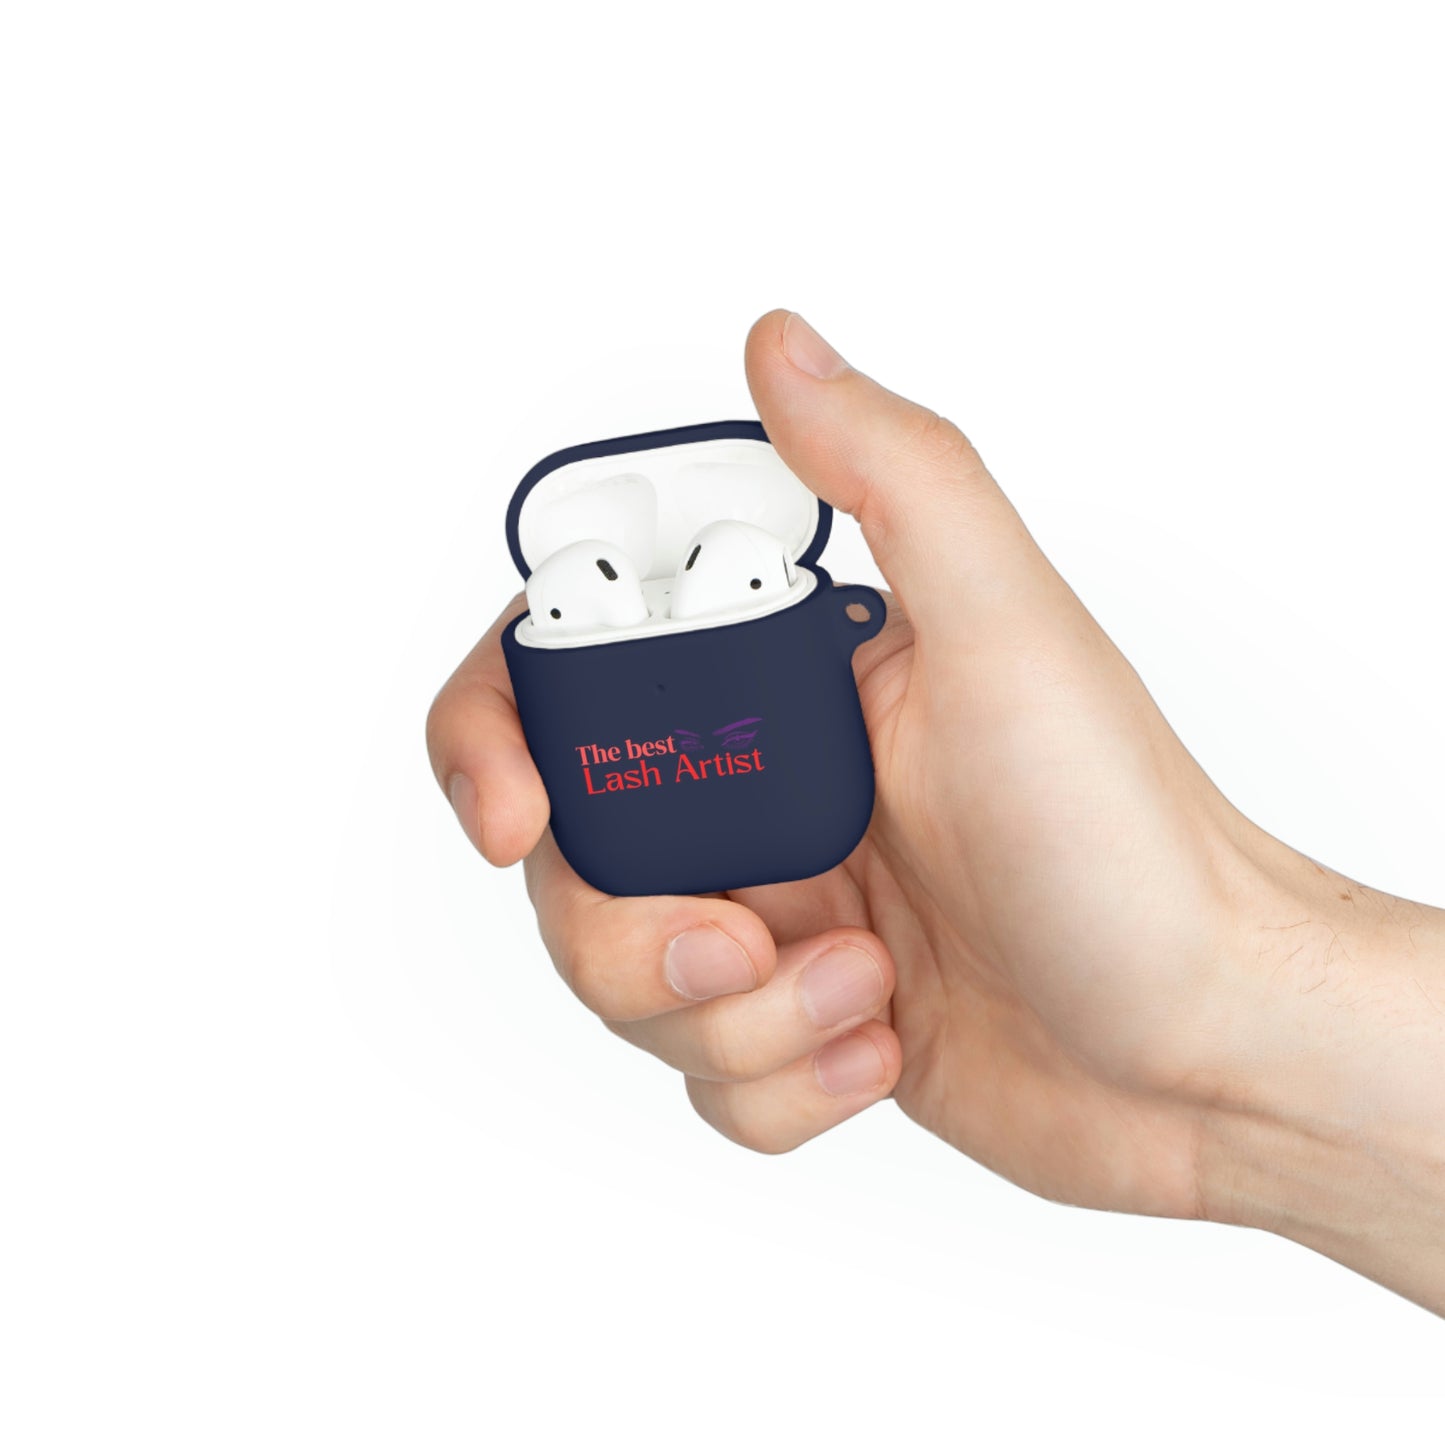 AirPods and AirPods Pro Case Cover, Lash Extension Case, Lash Extension Gift